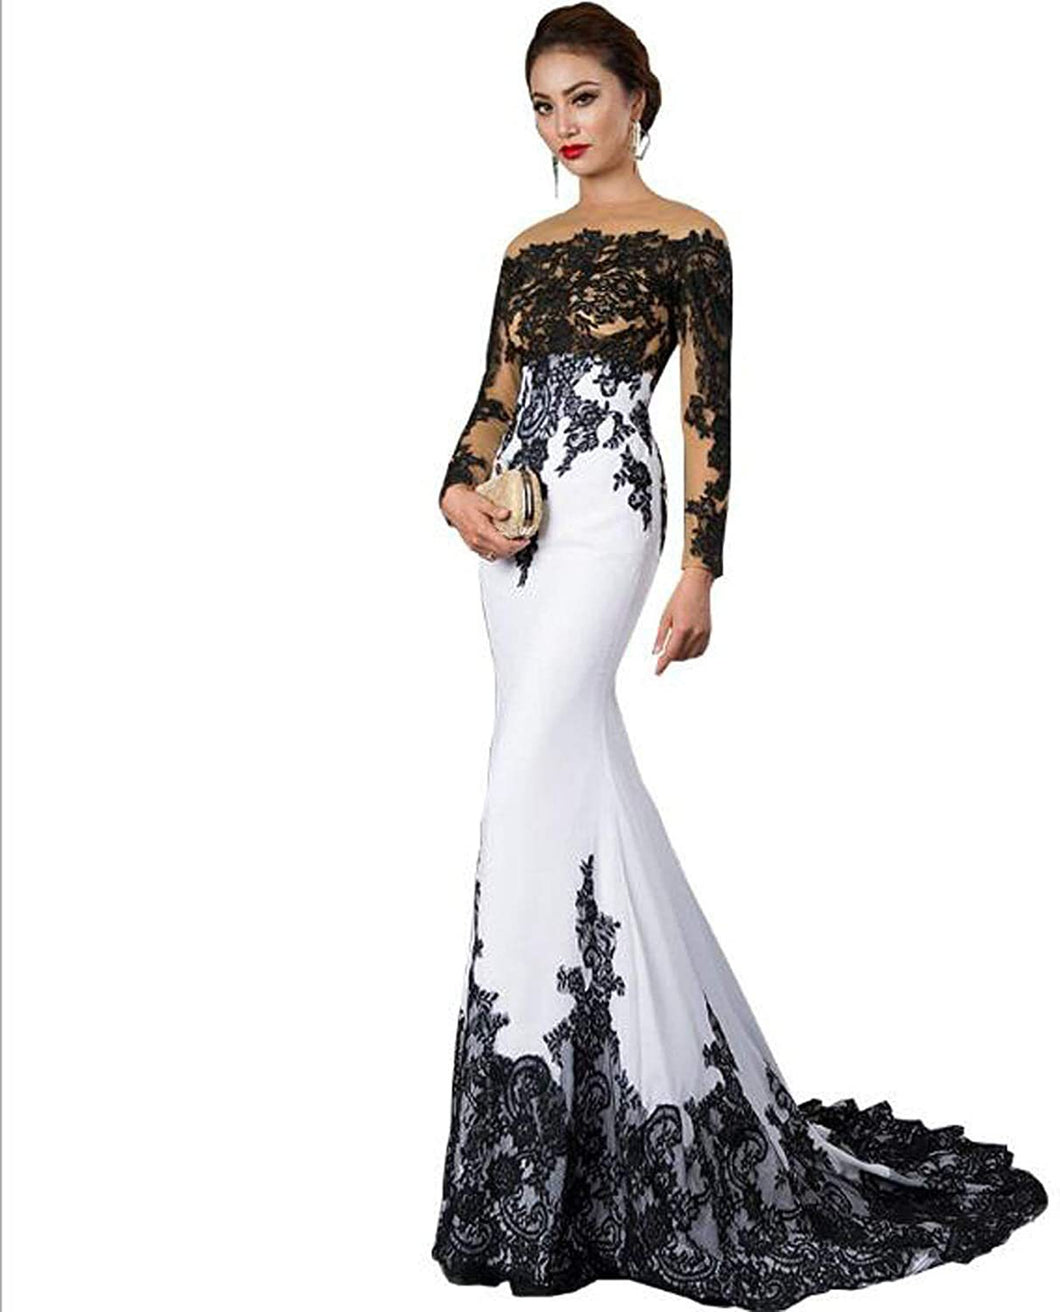 Women’s White Off-the-Shoulder Mermaid Evening Dress with Black Lace and Tail  Sizes 2-18 - Wazzi's Wear